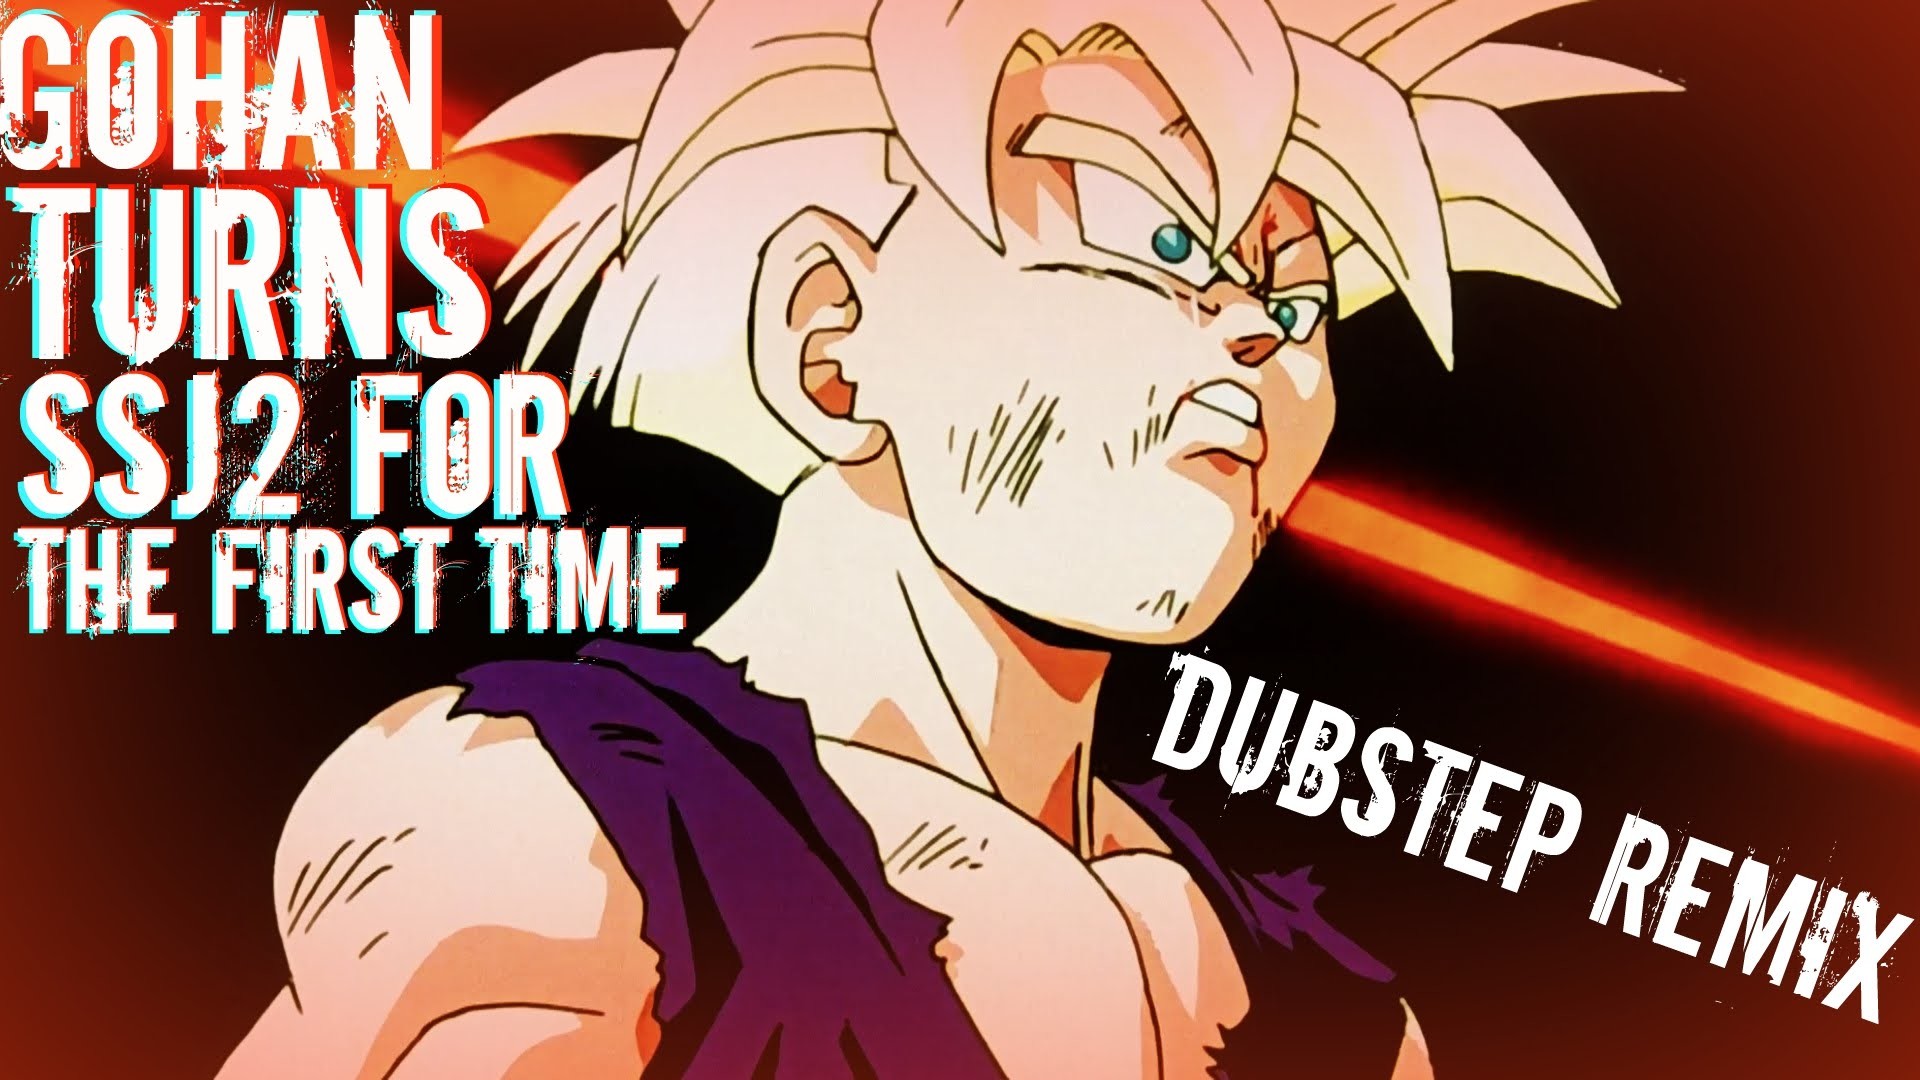 Gohan Turns Super Saiyan 2 For The First Time Dubstep Remix HD REMASTERED – YouTube